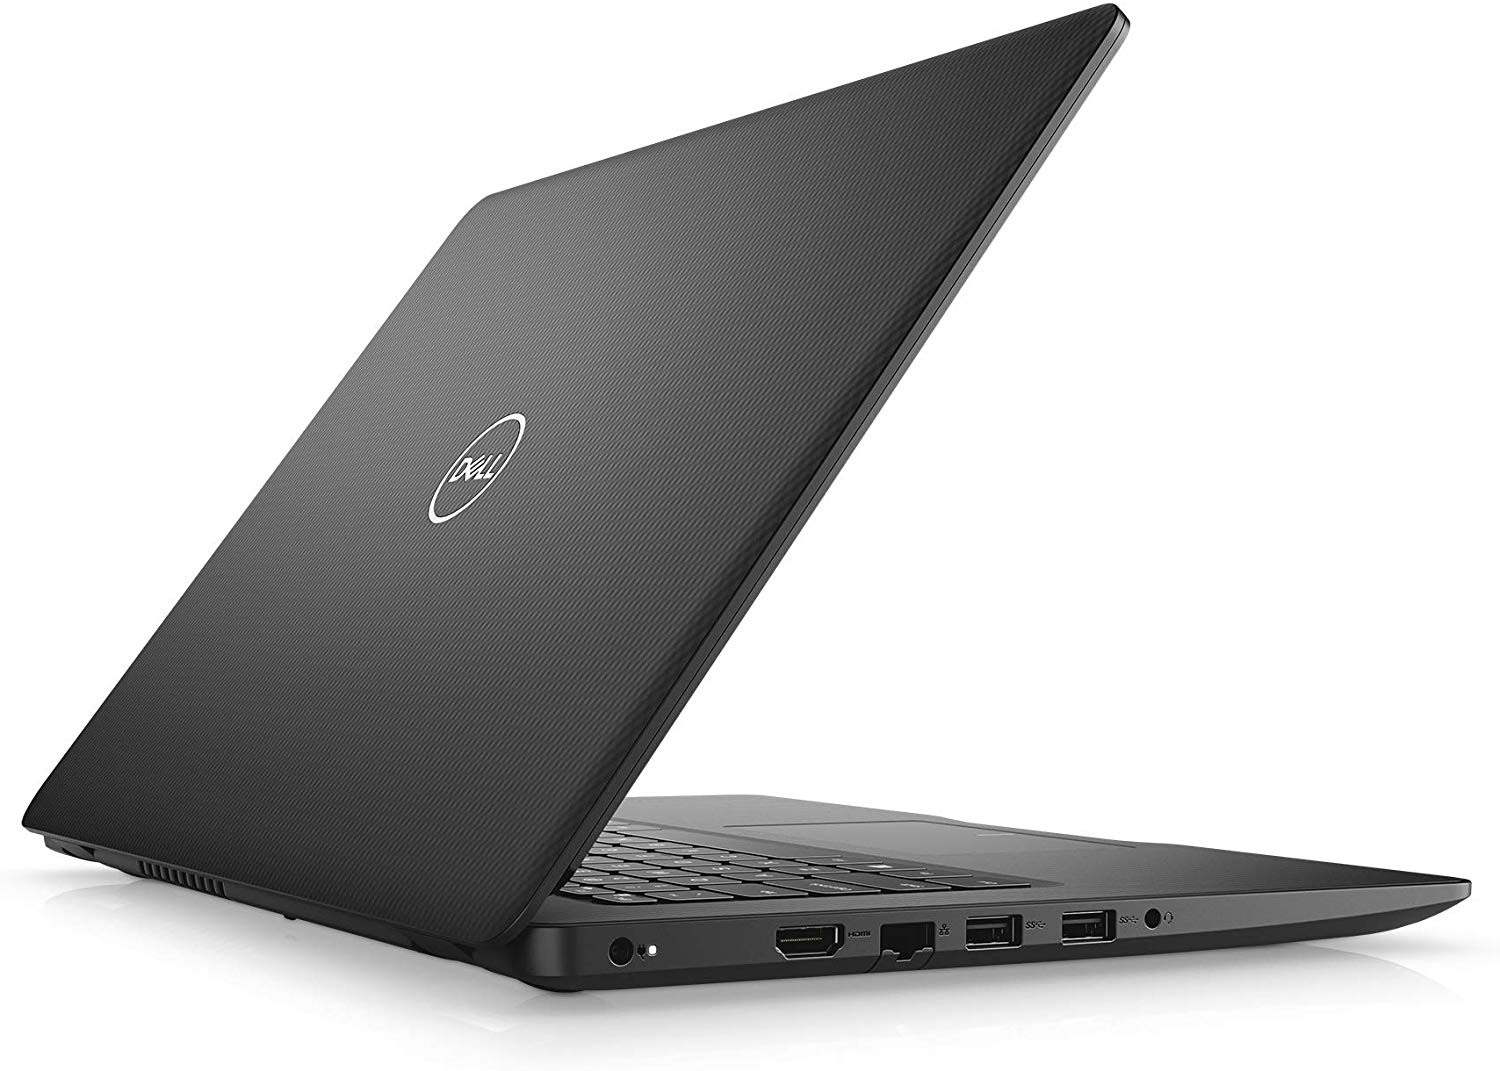 Dell Inspiron 14 3480 - Specs, Tests, and Prices | LaptopMedia.com